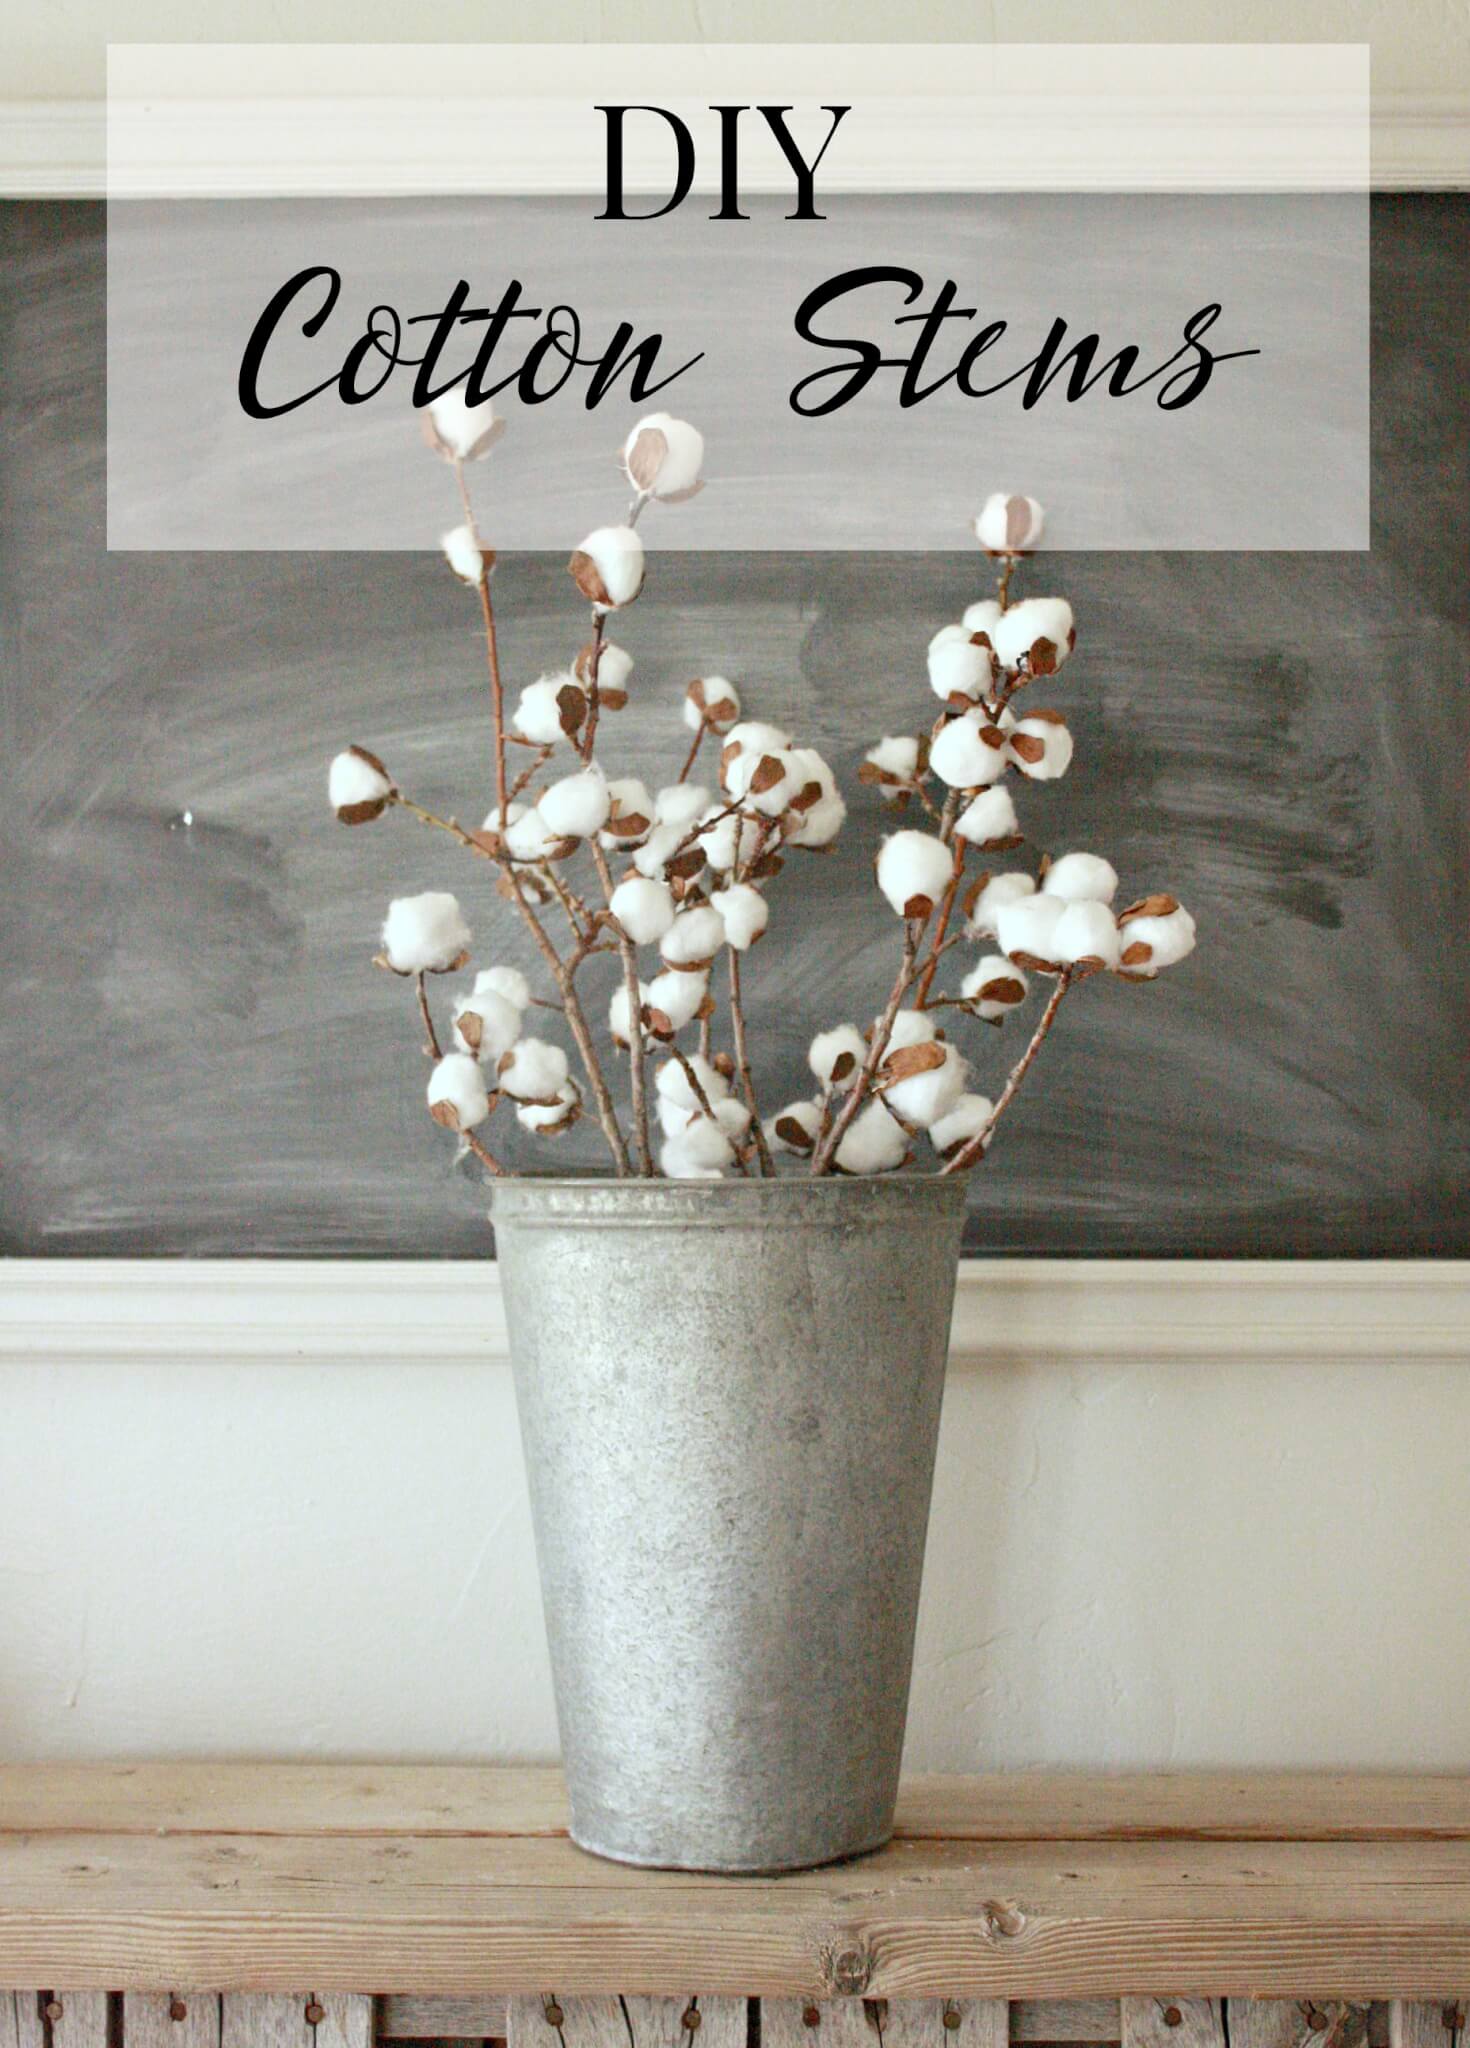 DIY Cotton Stems! Come see how easy it is to make some of your own! | Twelveonmain.com